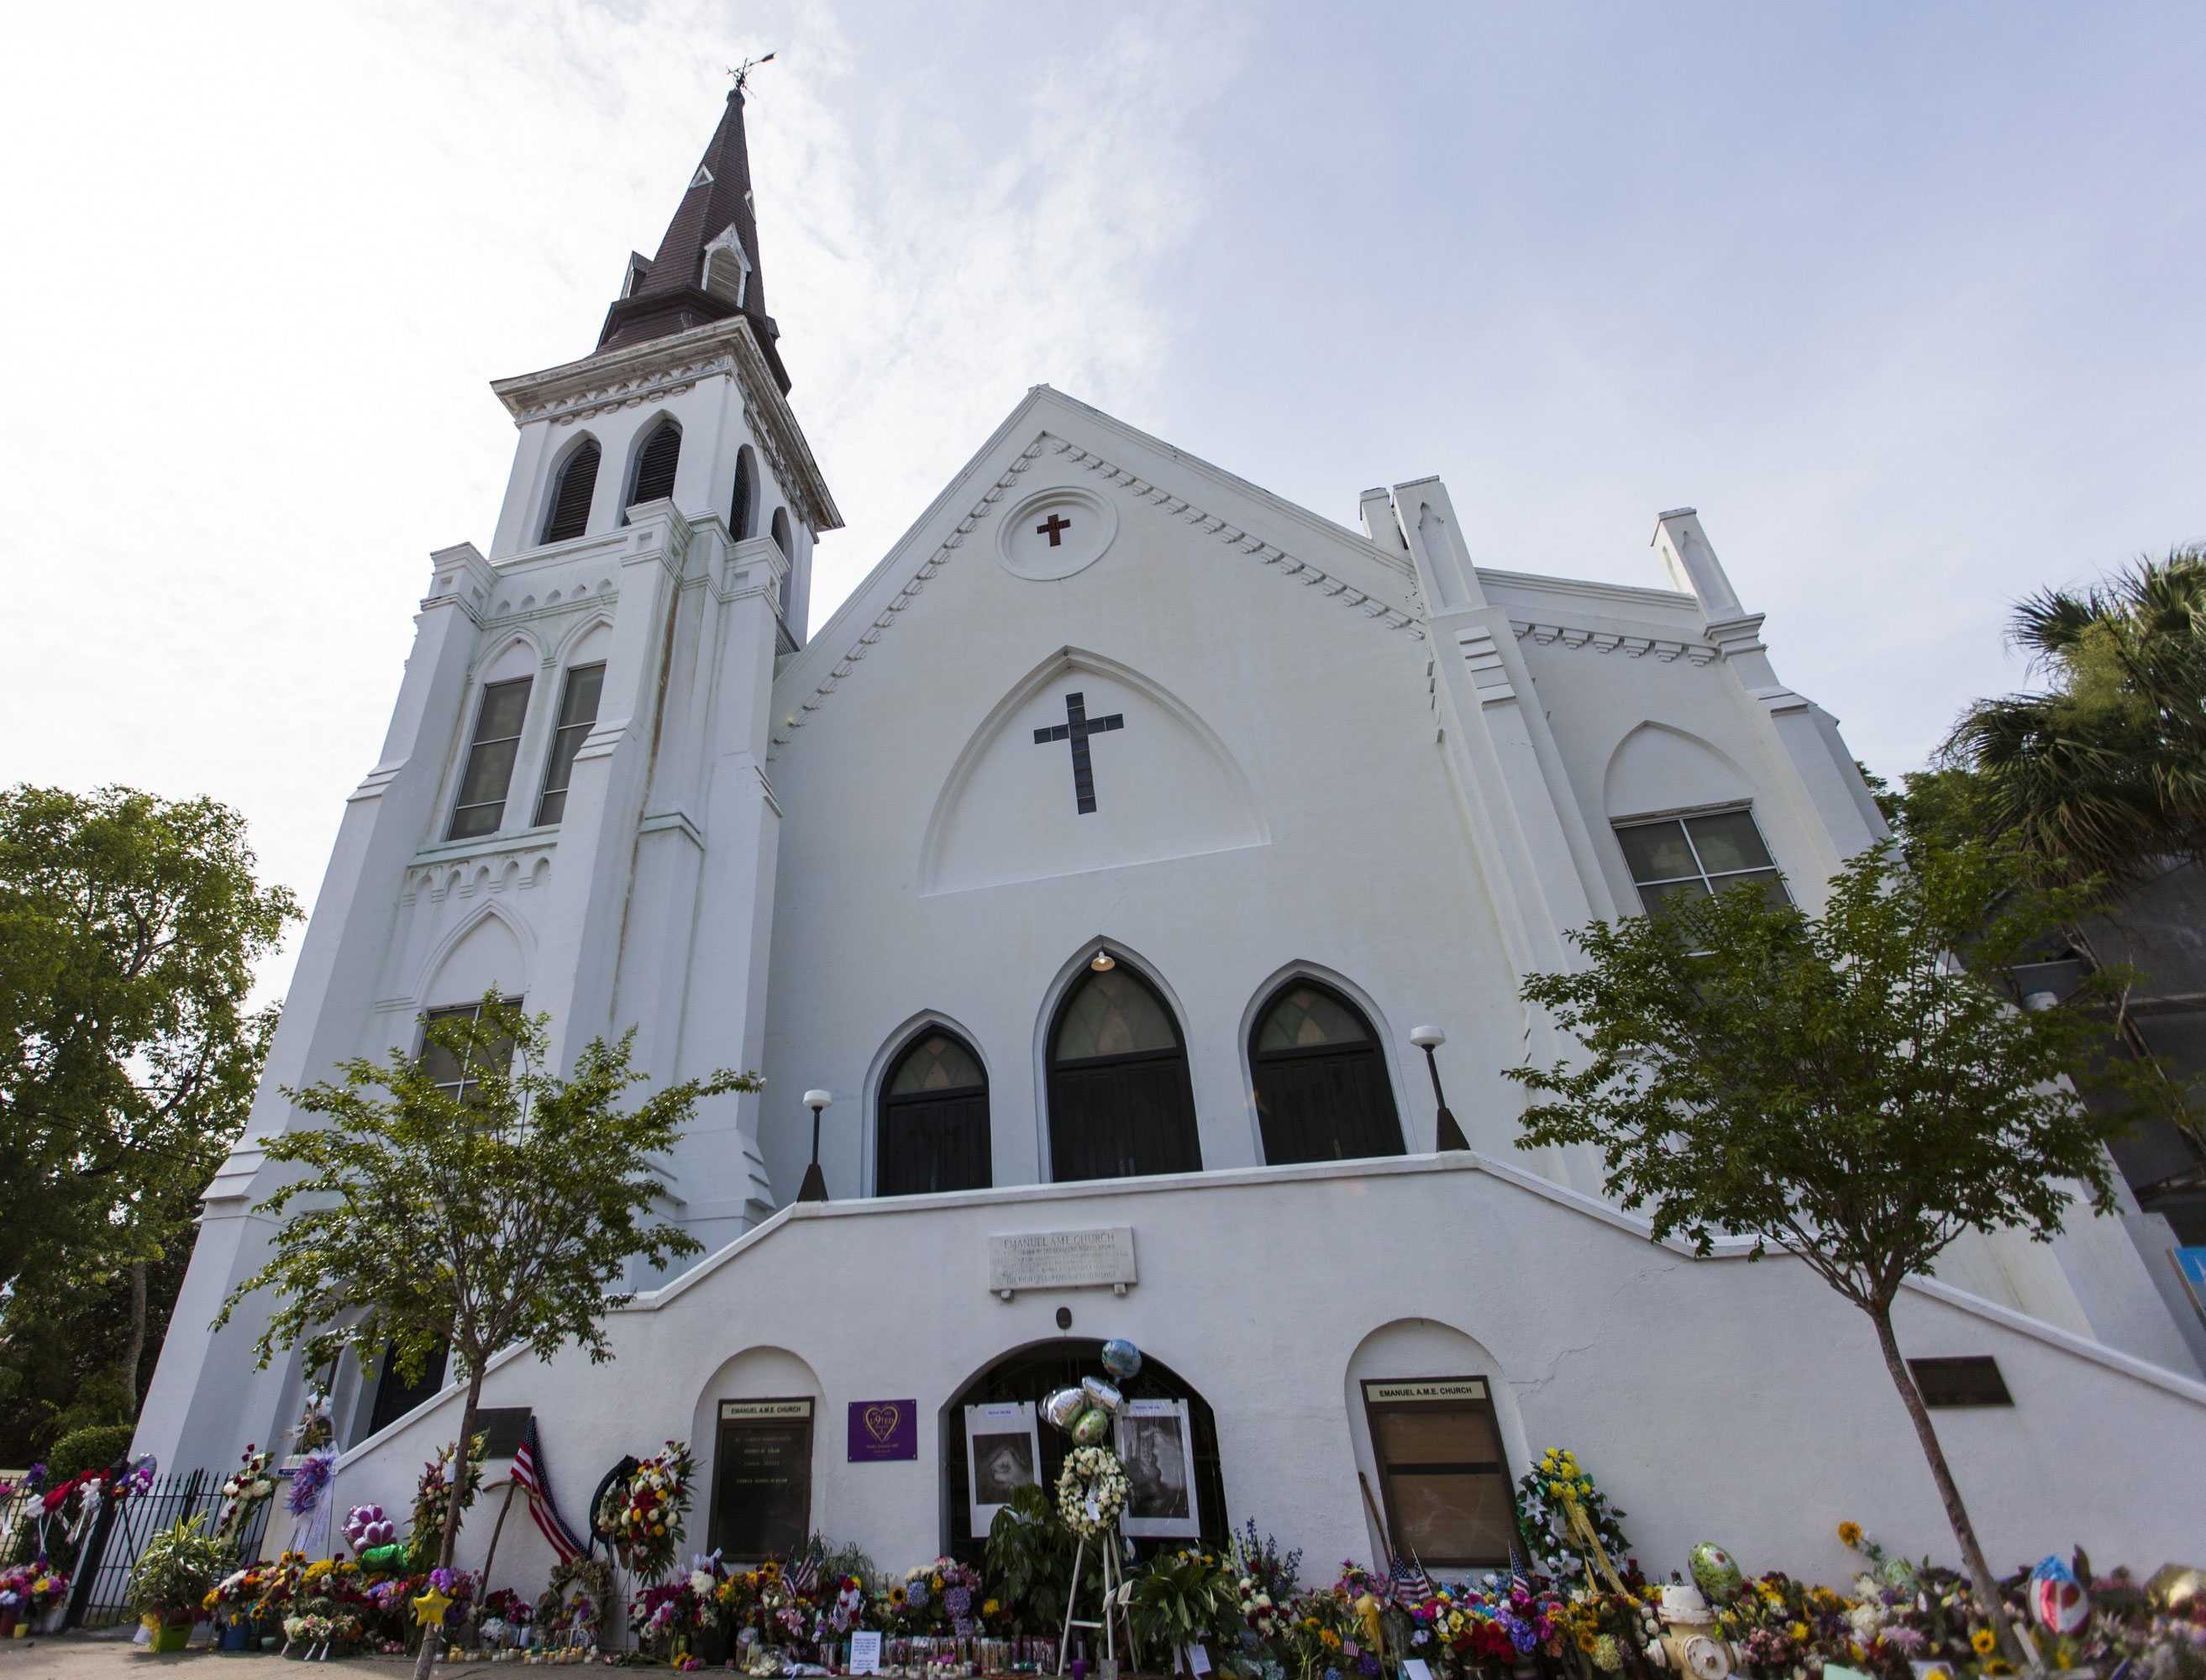 The large white church,Emanuel AME Church, has flowers, pictures, and candles are laid in front.